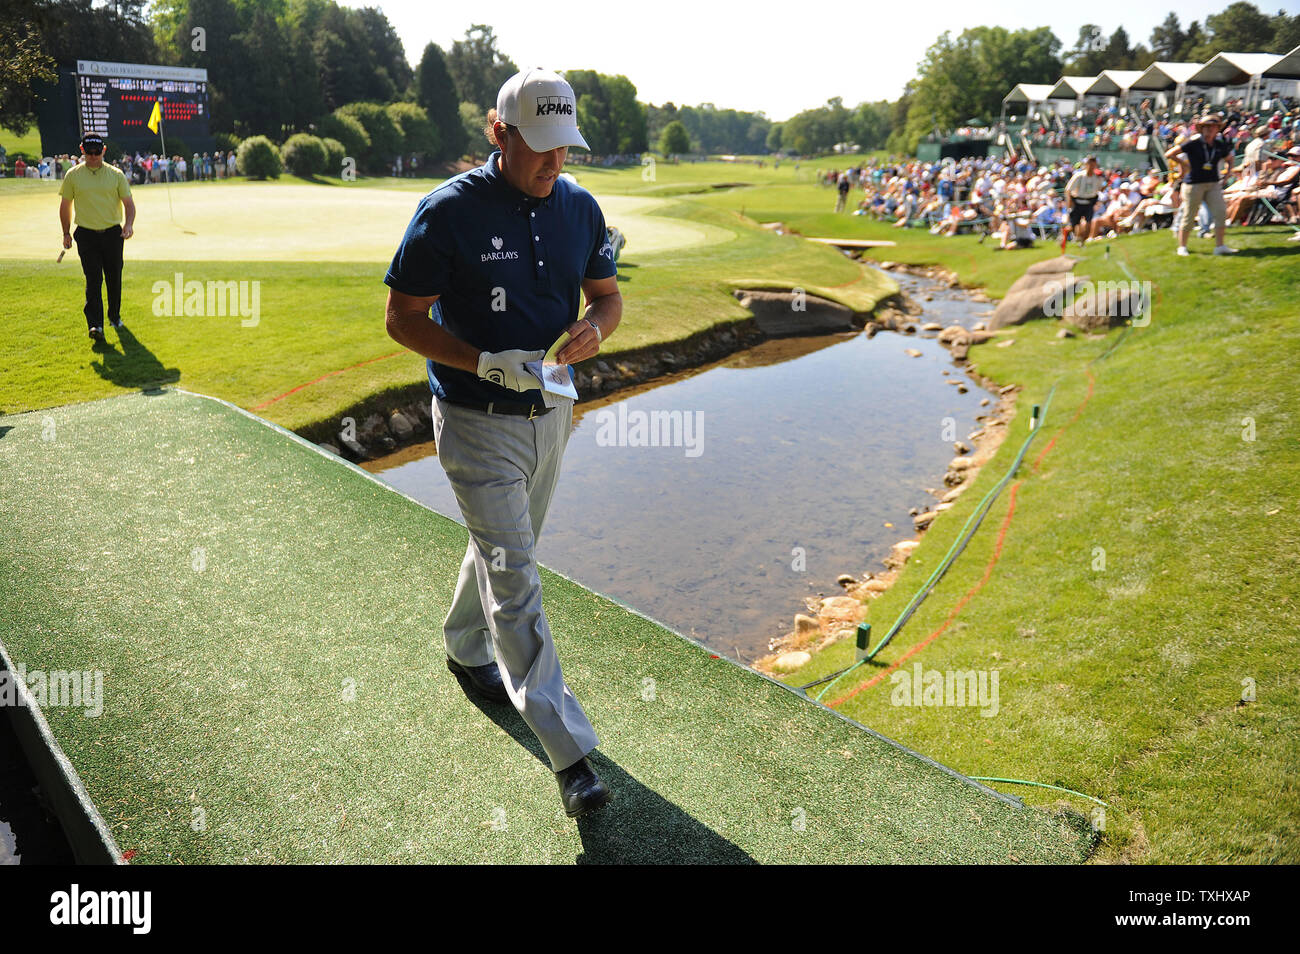 Phil Mickelson leaves the 18th green during the second round of the Quail Hollow Tournament in Charlotte, North Carolina on April 30, 2010.   UPI/Kevin Dietsch Stock Photo